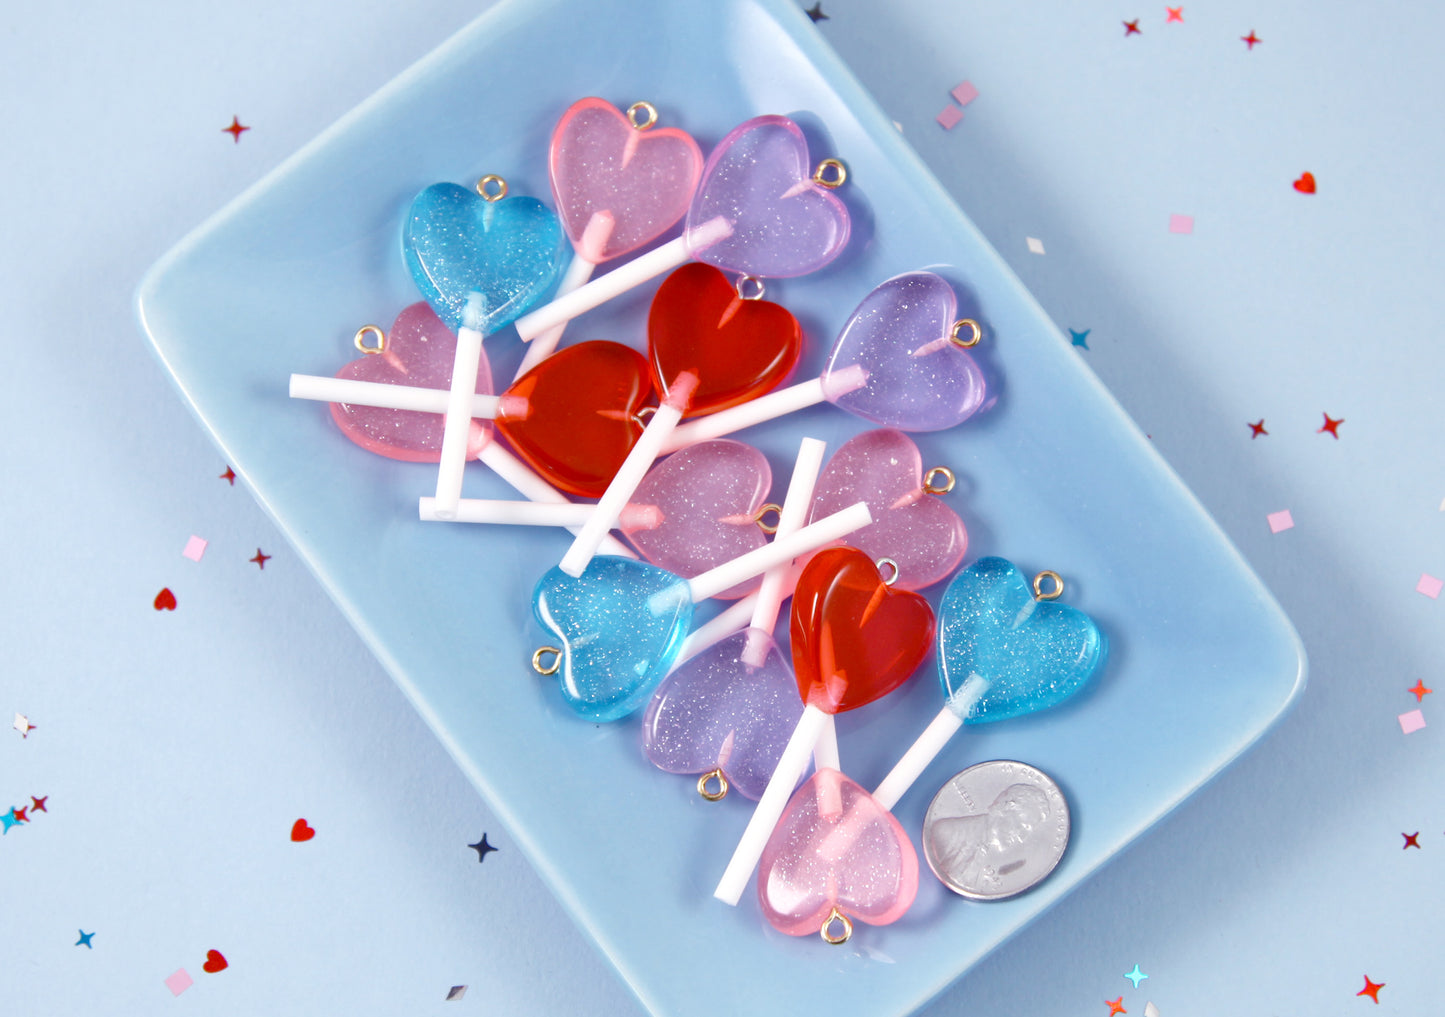 Heart Lollipop Charms - 21mm Small Heart Shaped Fake Candy Acrylic or Resin Charms - 12 pc set